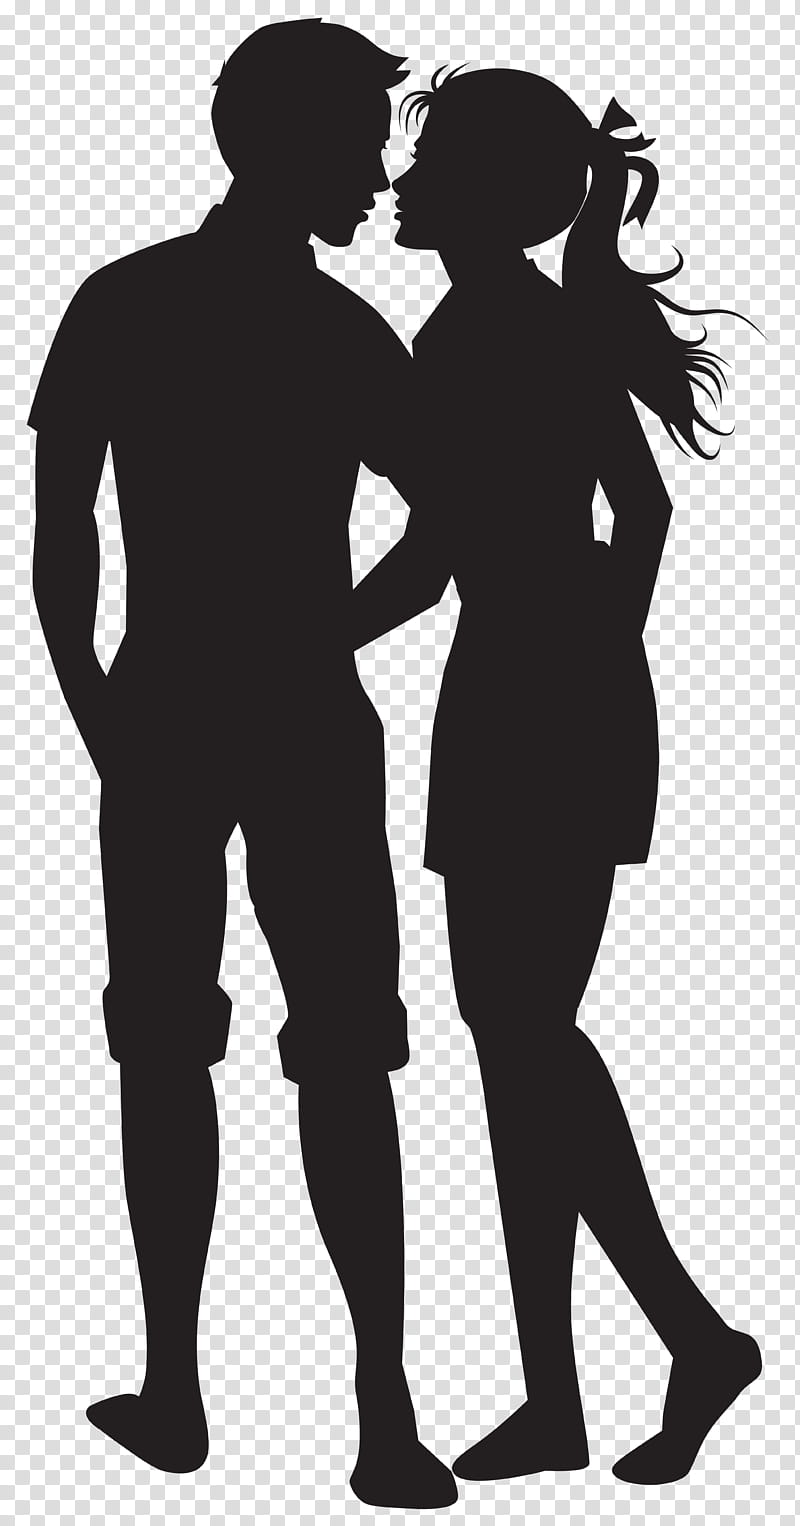 Love Black And White, Couples, Silhouette, Man, Standing, Black And White
, Male, Joint transparent background PNG clipart